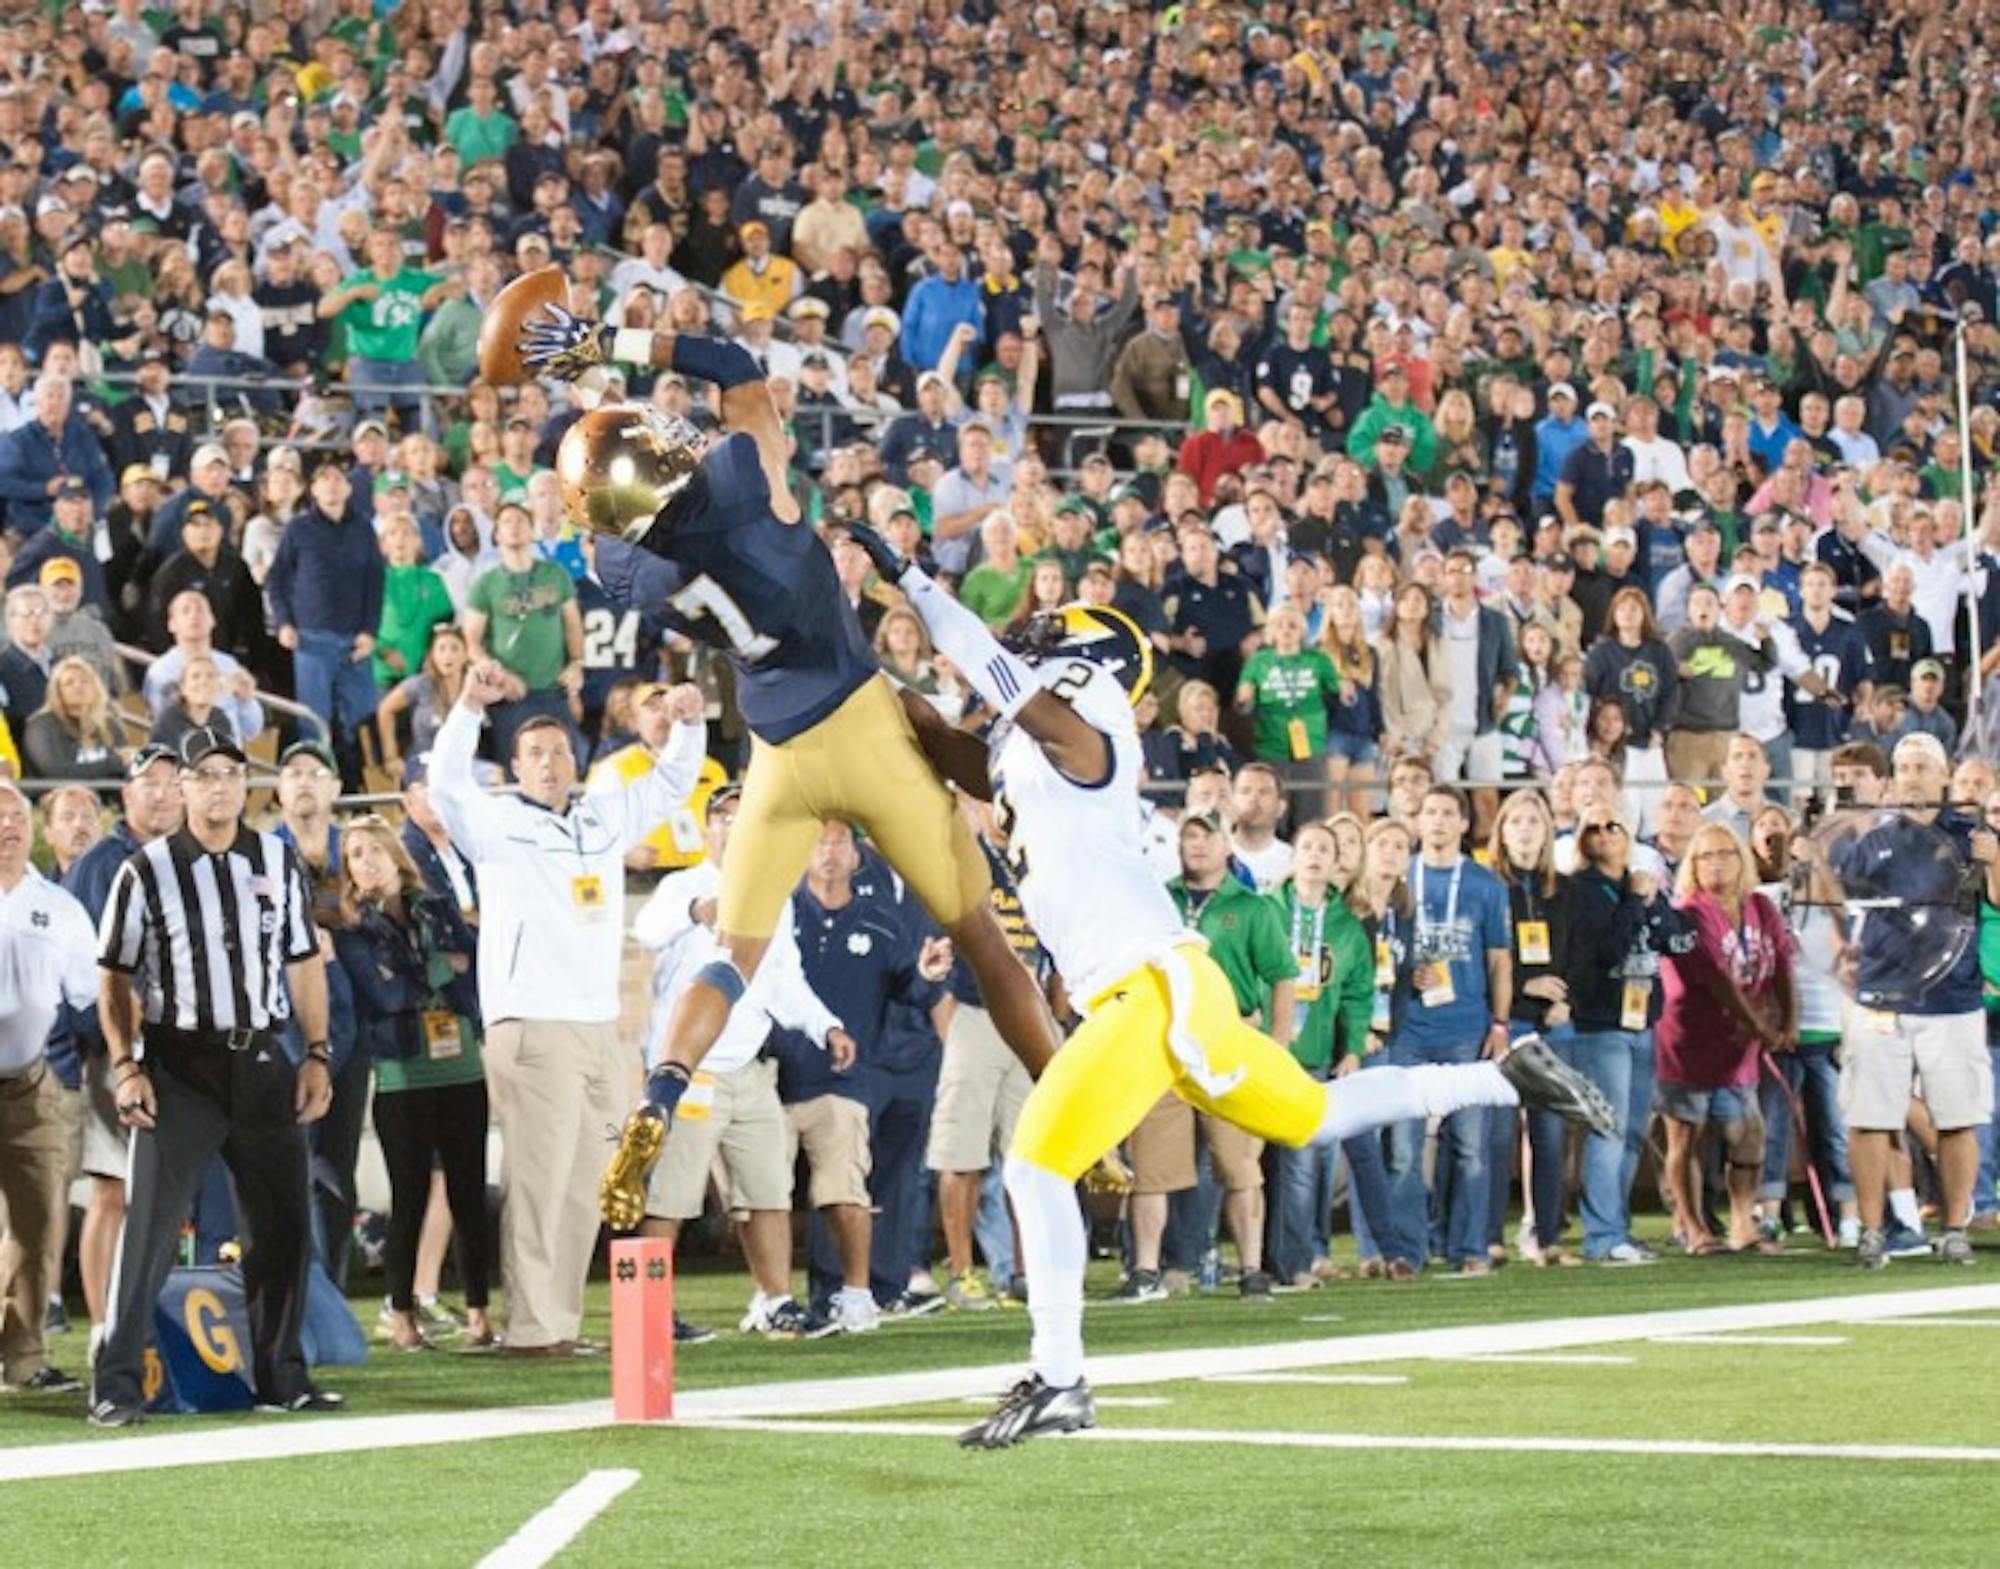 Irish sophomore receiver Will Fuller leaps to haul in a touchdown pass from senior quarterback Everett Golson during Notre Dame’s 31-0 win over Michigan on Saturday night at Notre Dame Stadium.